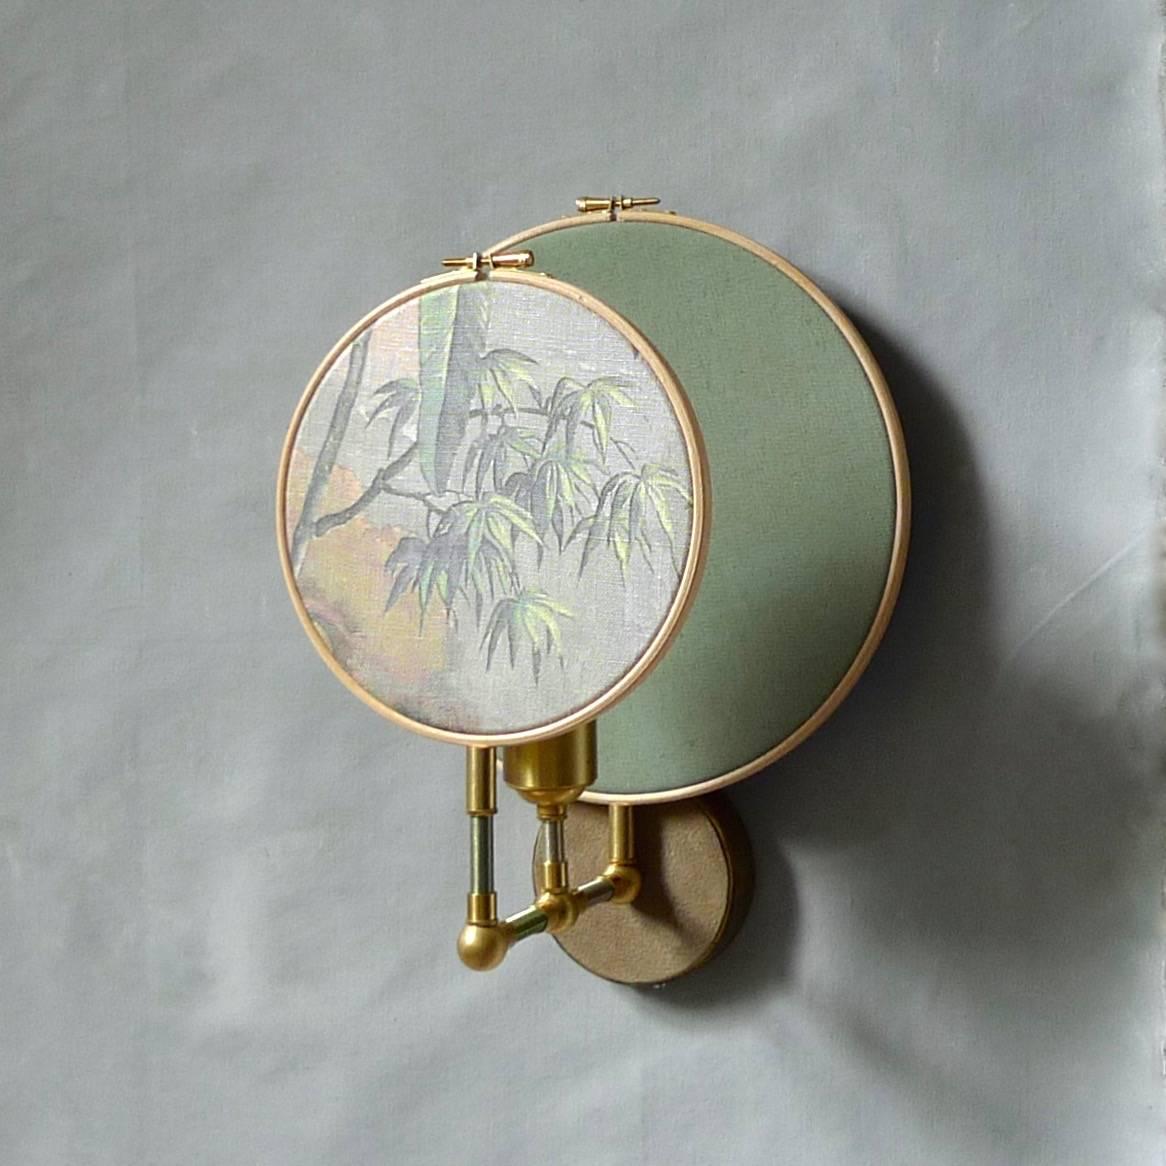 Circle blue grey, wall sconce, Sander Bottinga 
Handmade in brass, leather, wood and hand printed and painted linen.
A dimmer is inlaid with leather. Also possible without a dimmer
Dimensions: H 35 x W 27 x D 23 cm. 

The design artwork is